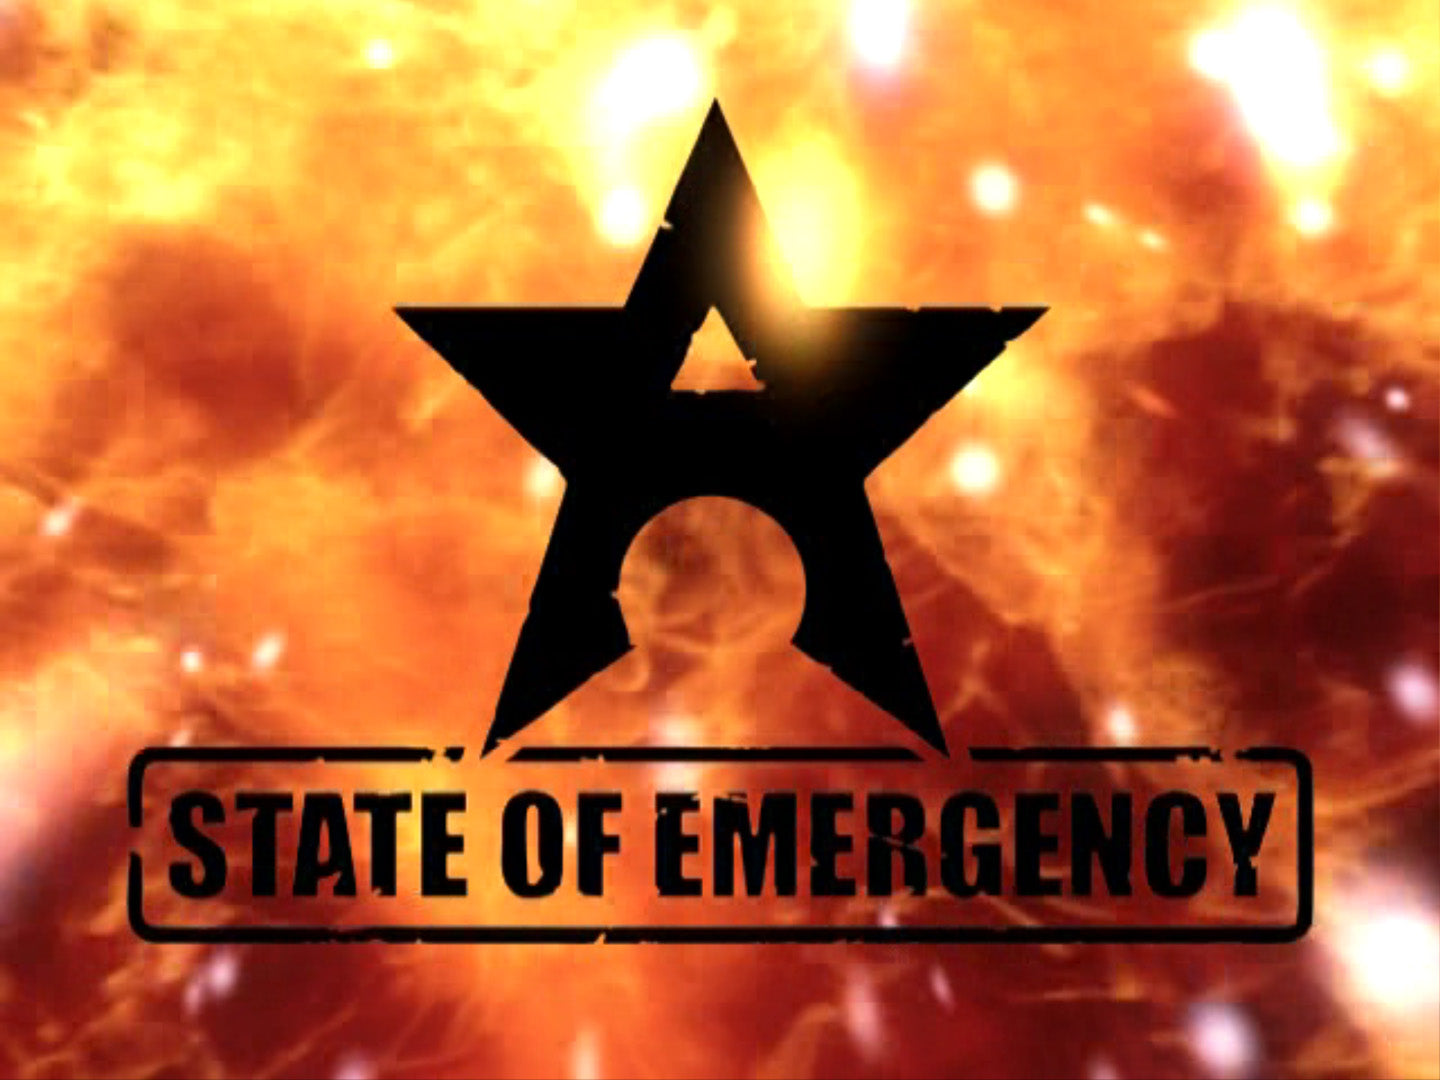 State of Emergency - PlayStation 2 (PS2) Game